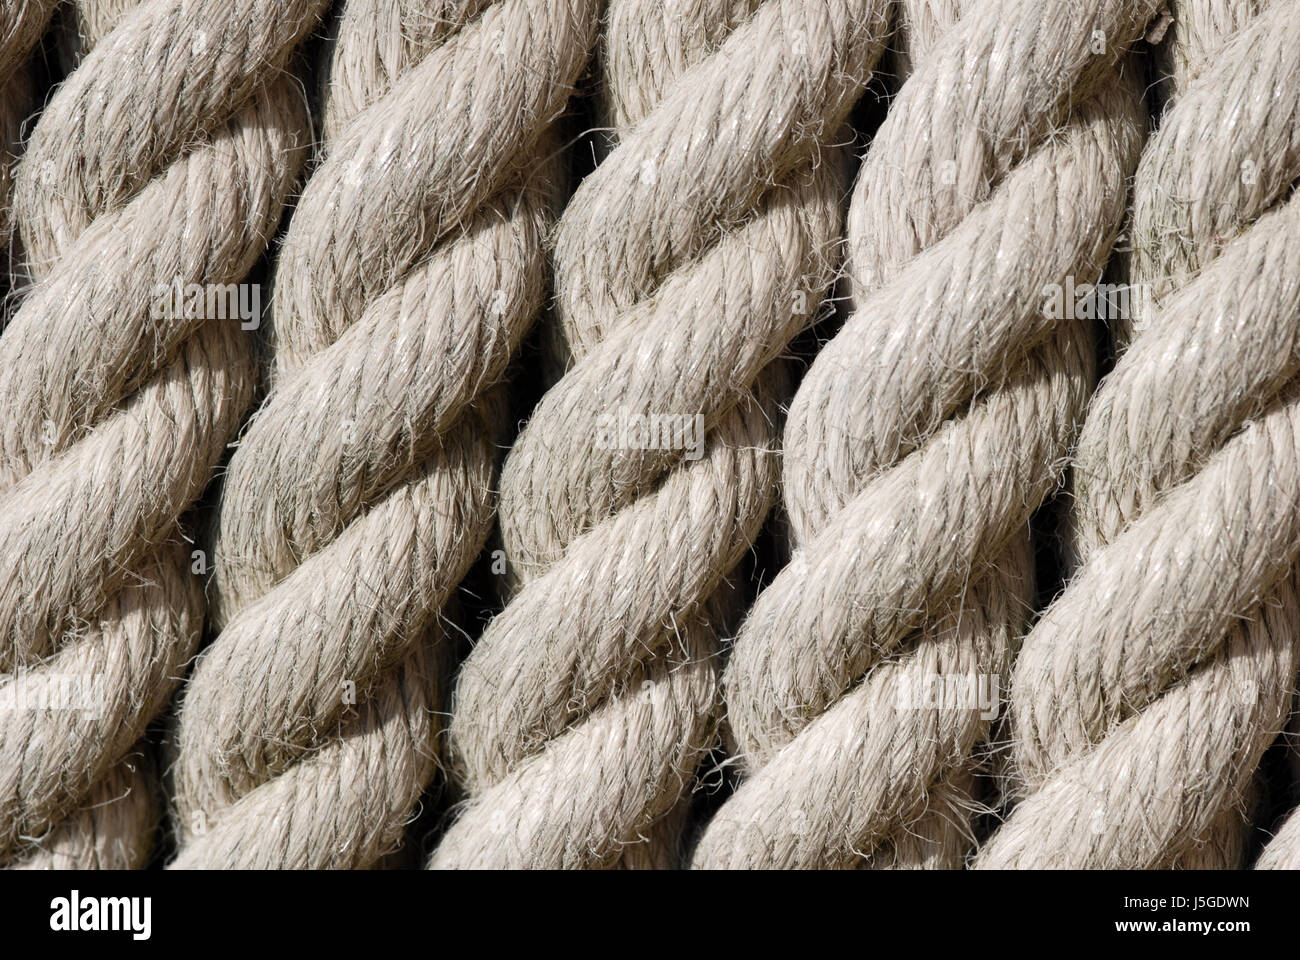 industry strong cord plaited braided ropes tow structure fiber